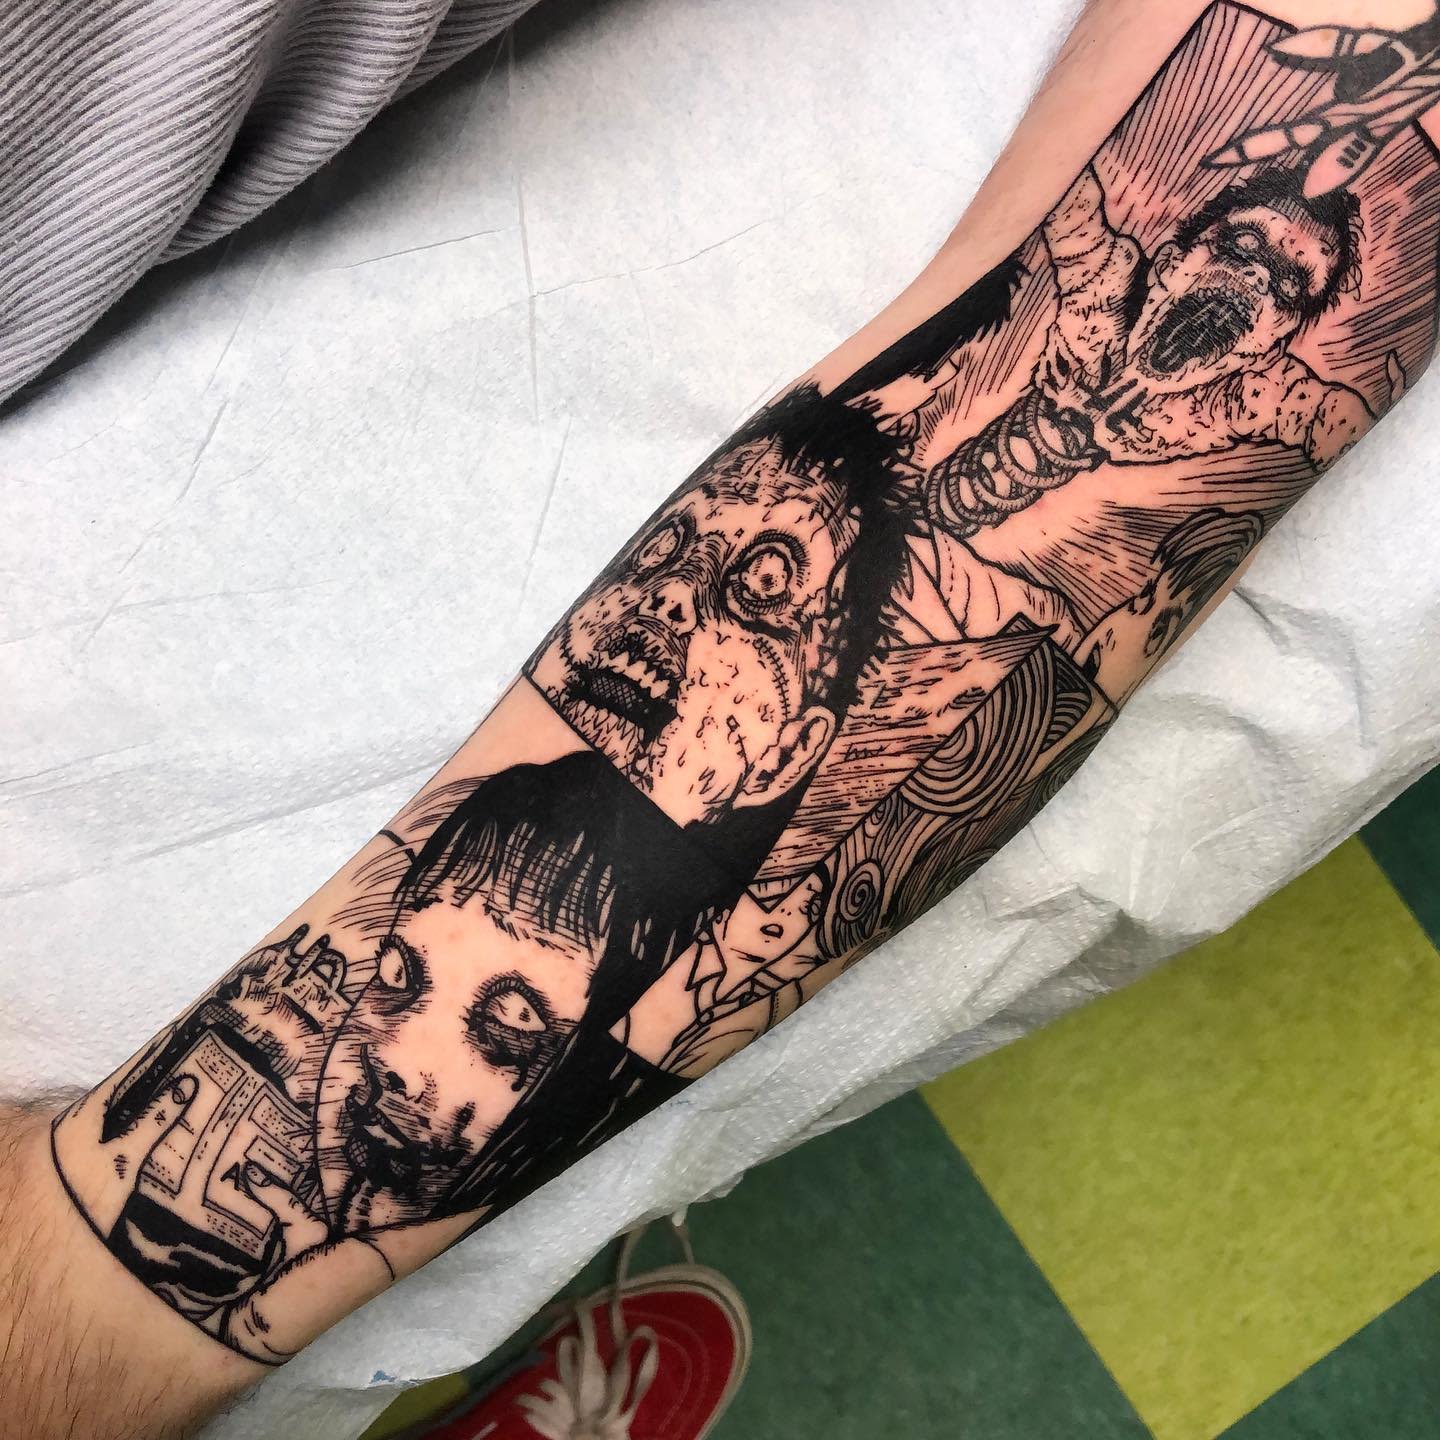 Some Junji Ito related tattoo works collected by Tattooer Sun - Imgur